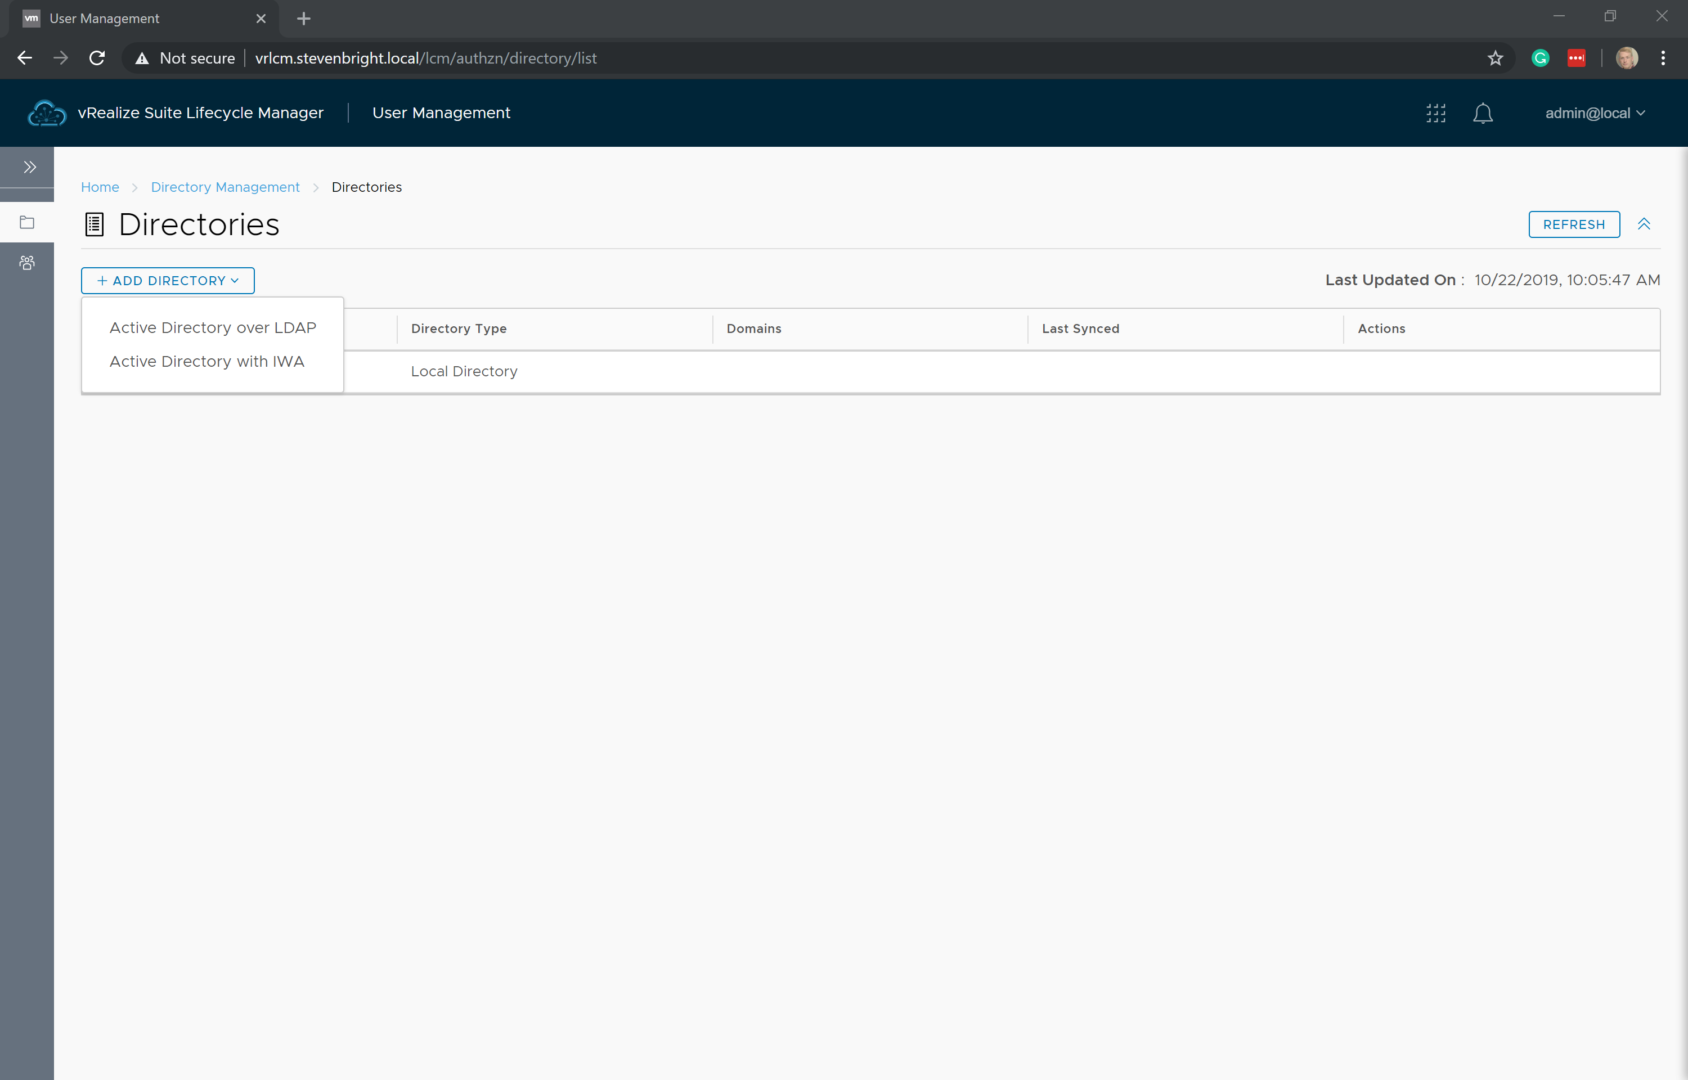 vRealize Suite Lifecycle Manager - User Management - Directory Management - Directory List